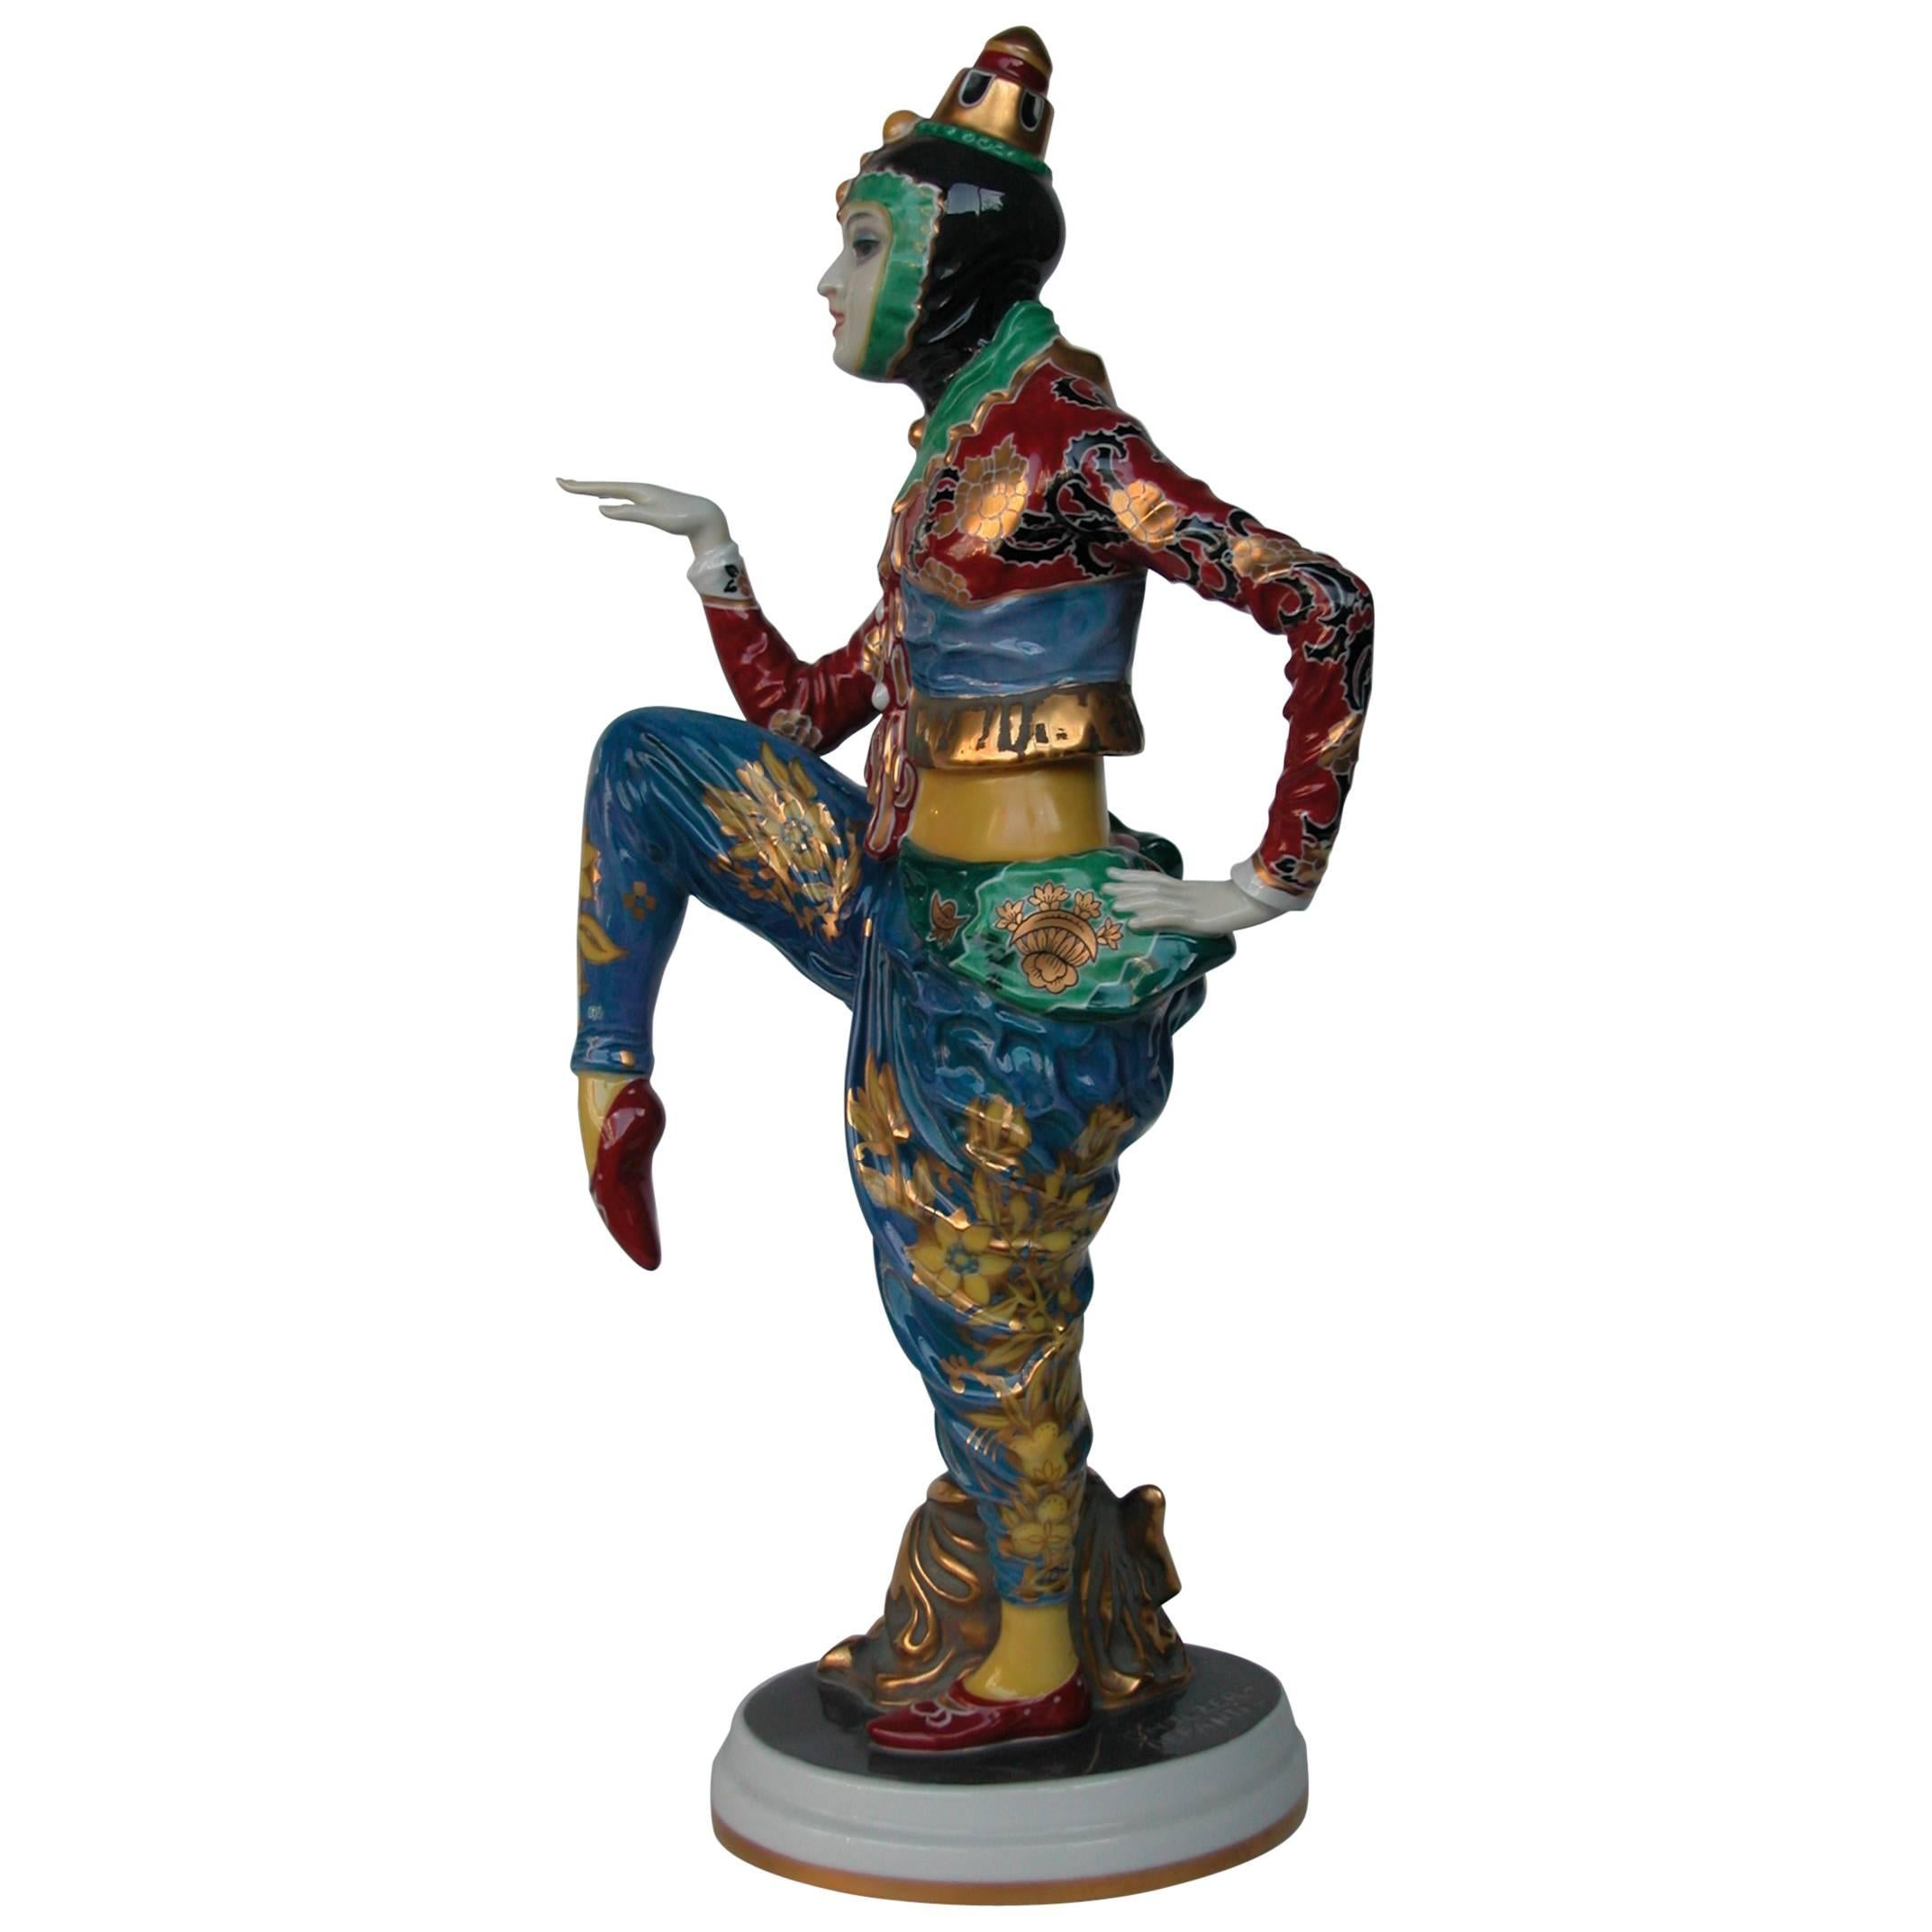 "Corean Dance" Figurine by Holzer-Defanti for Rosenthal, Germany, 1919 For Sale